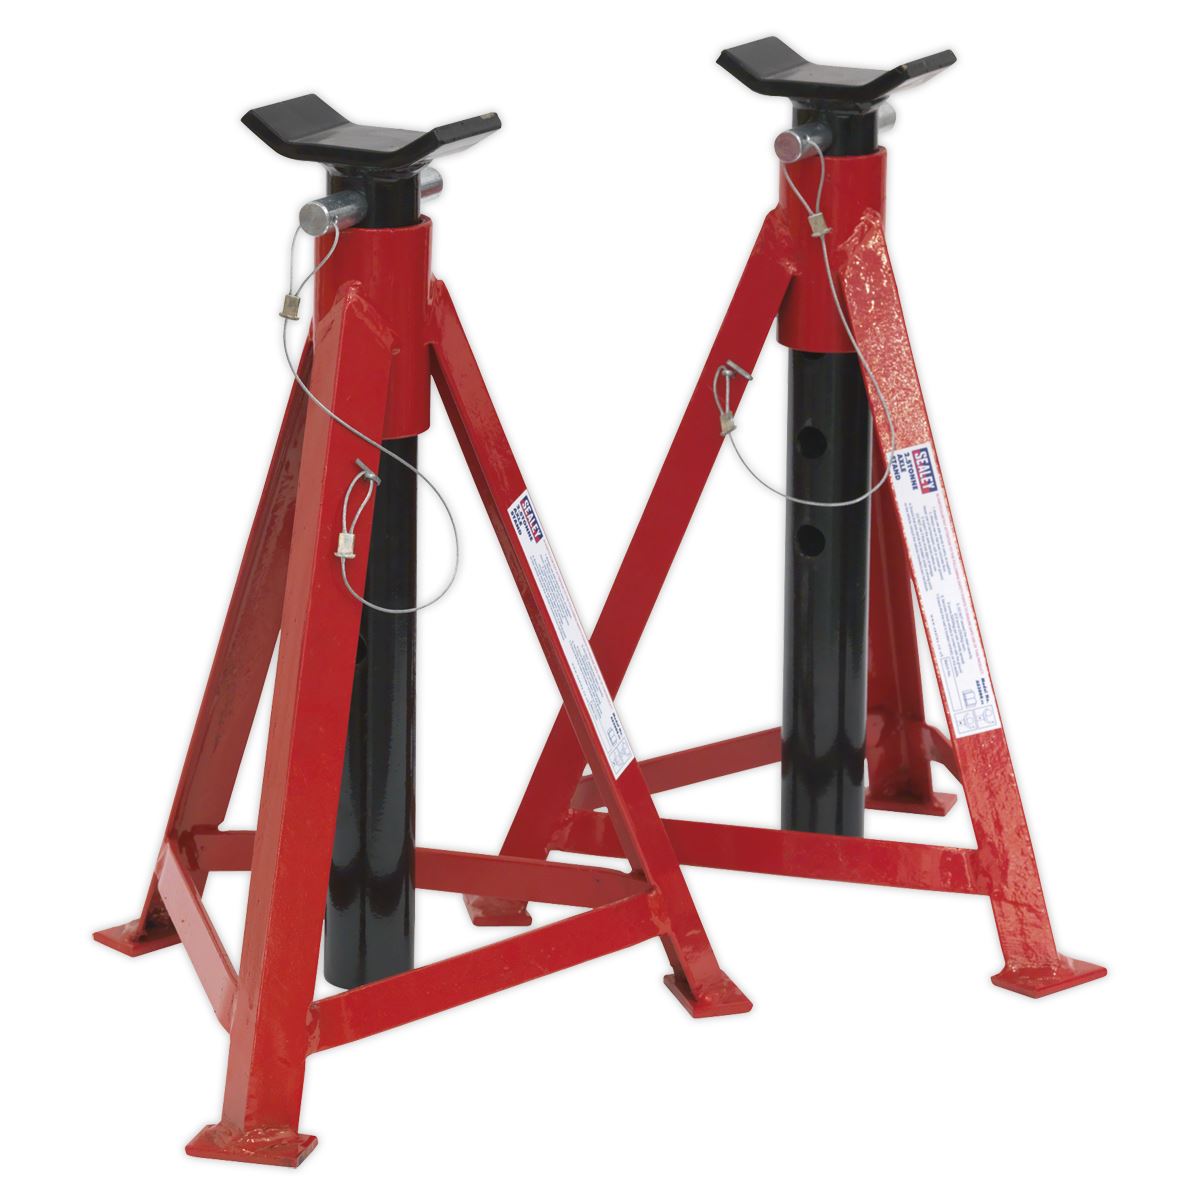 Sealey Premier Axle Stands (Pair) 2.5 Tonne Capacity per Stand Medium Height